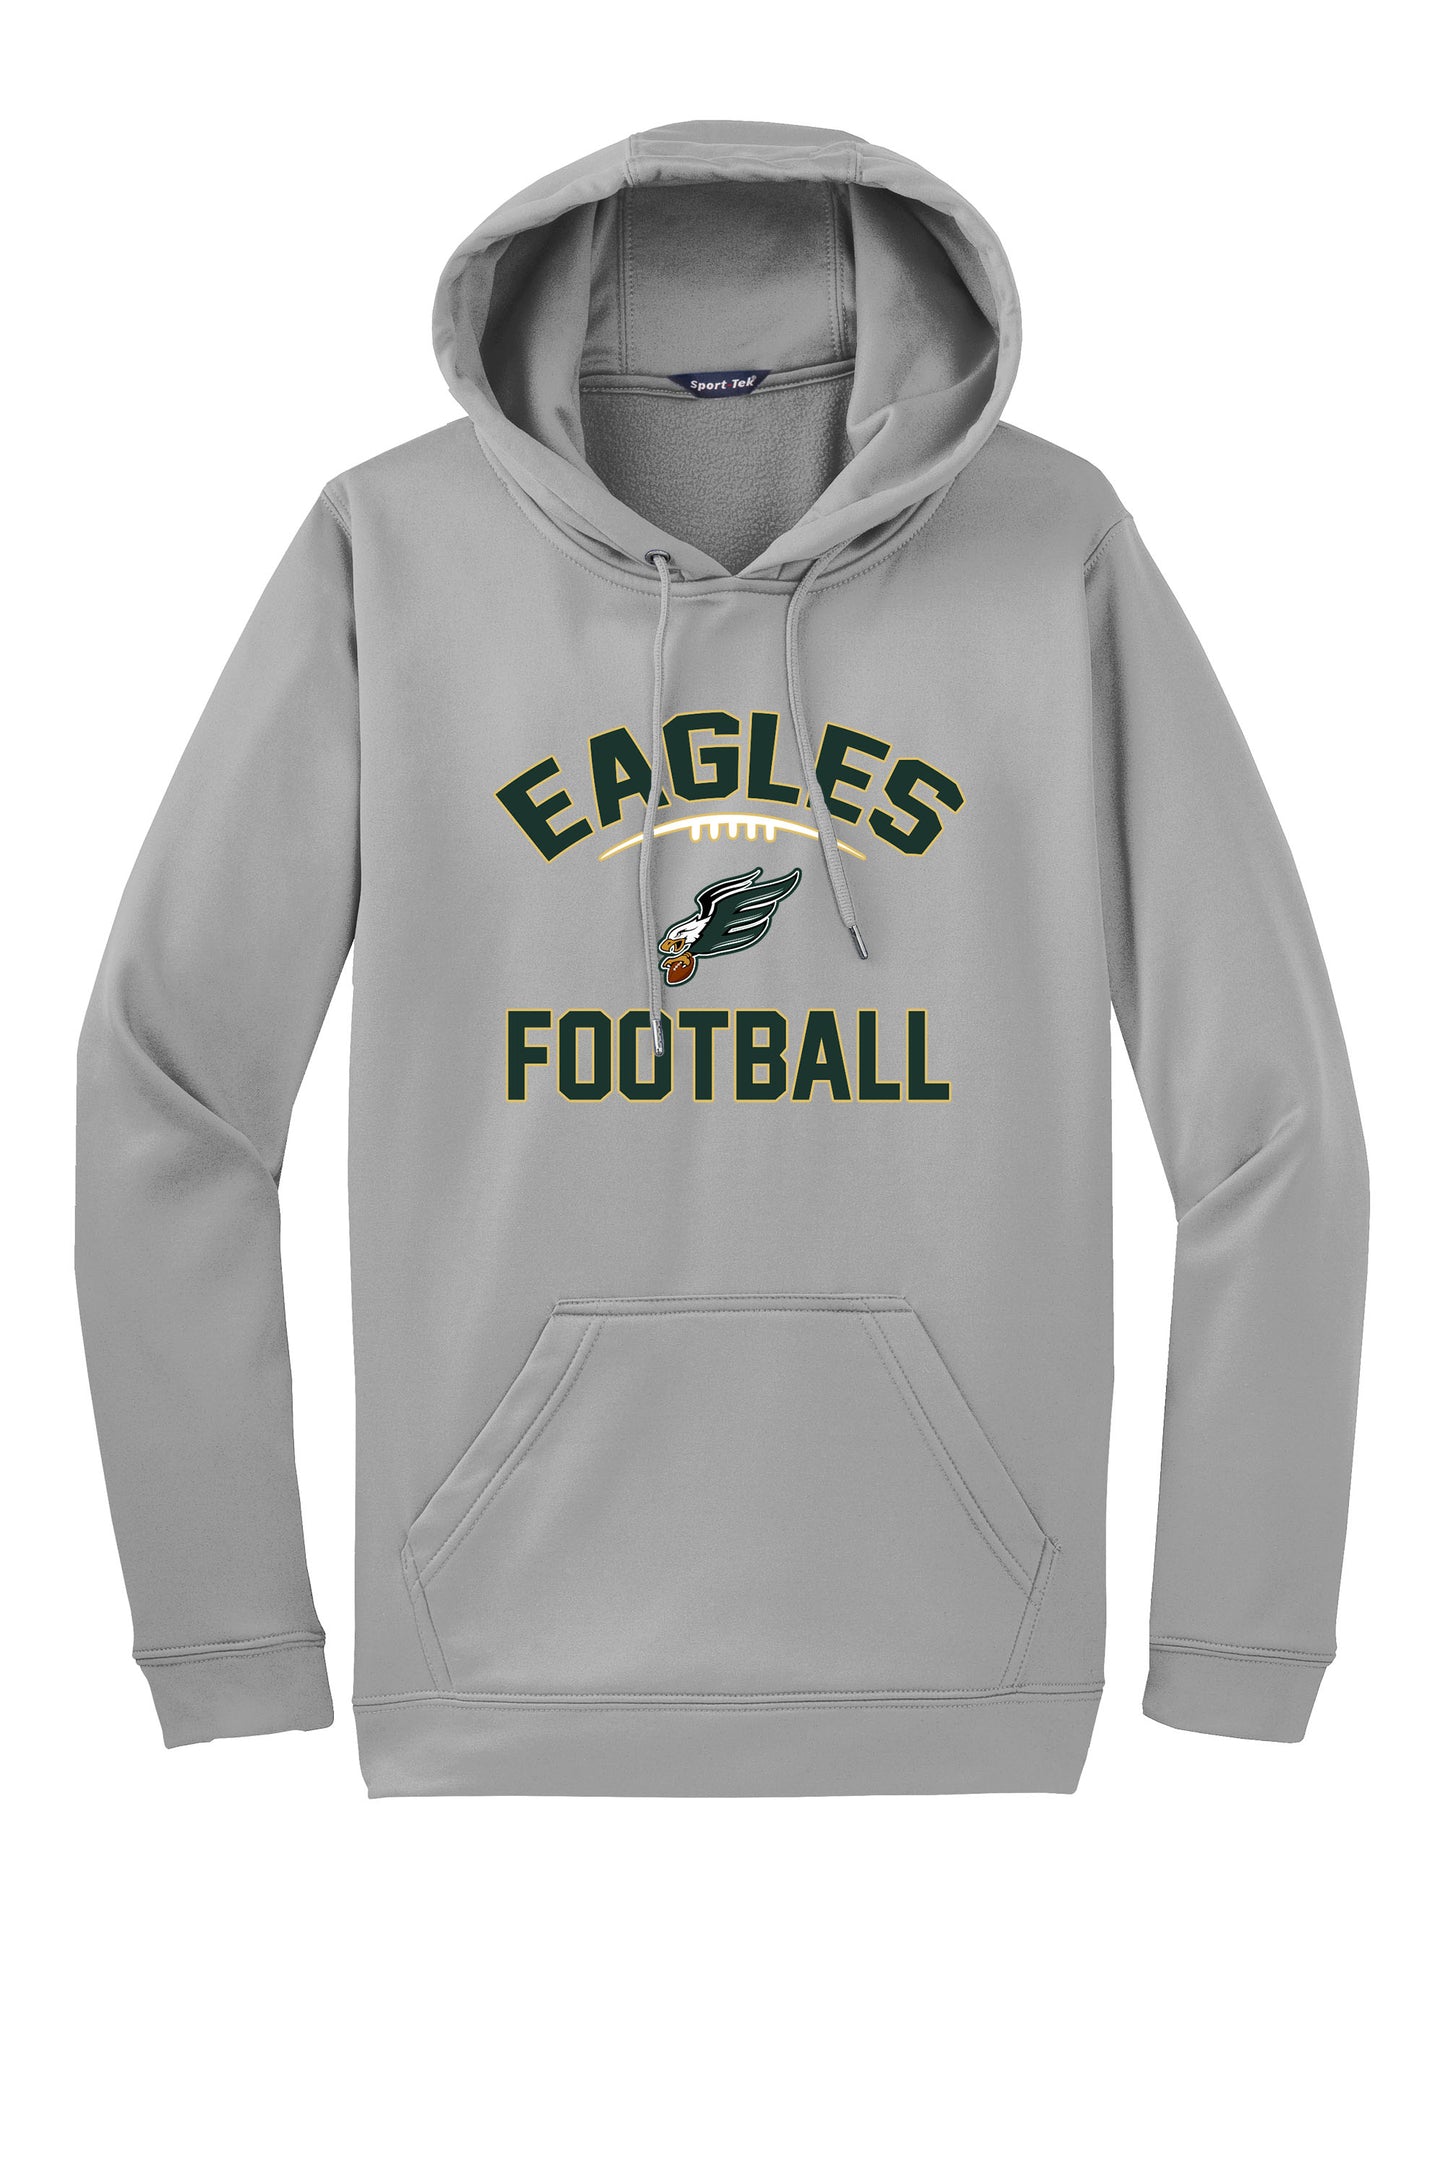 Enfield Eagles Football Adult Fleece Hoodie "Classic" - F244 (color options available)